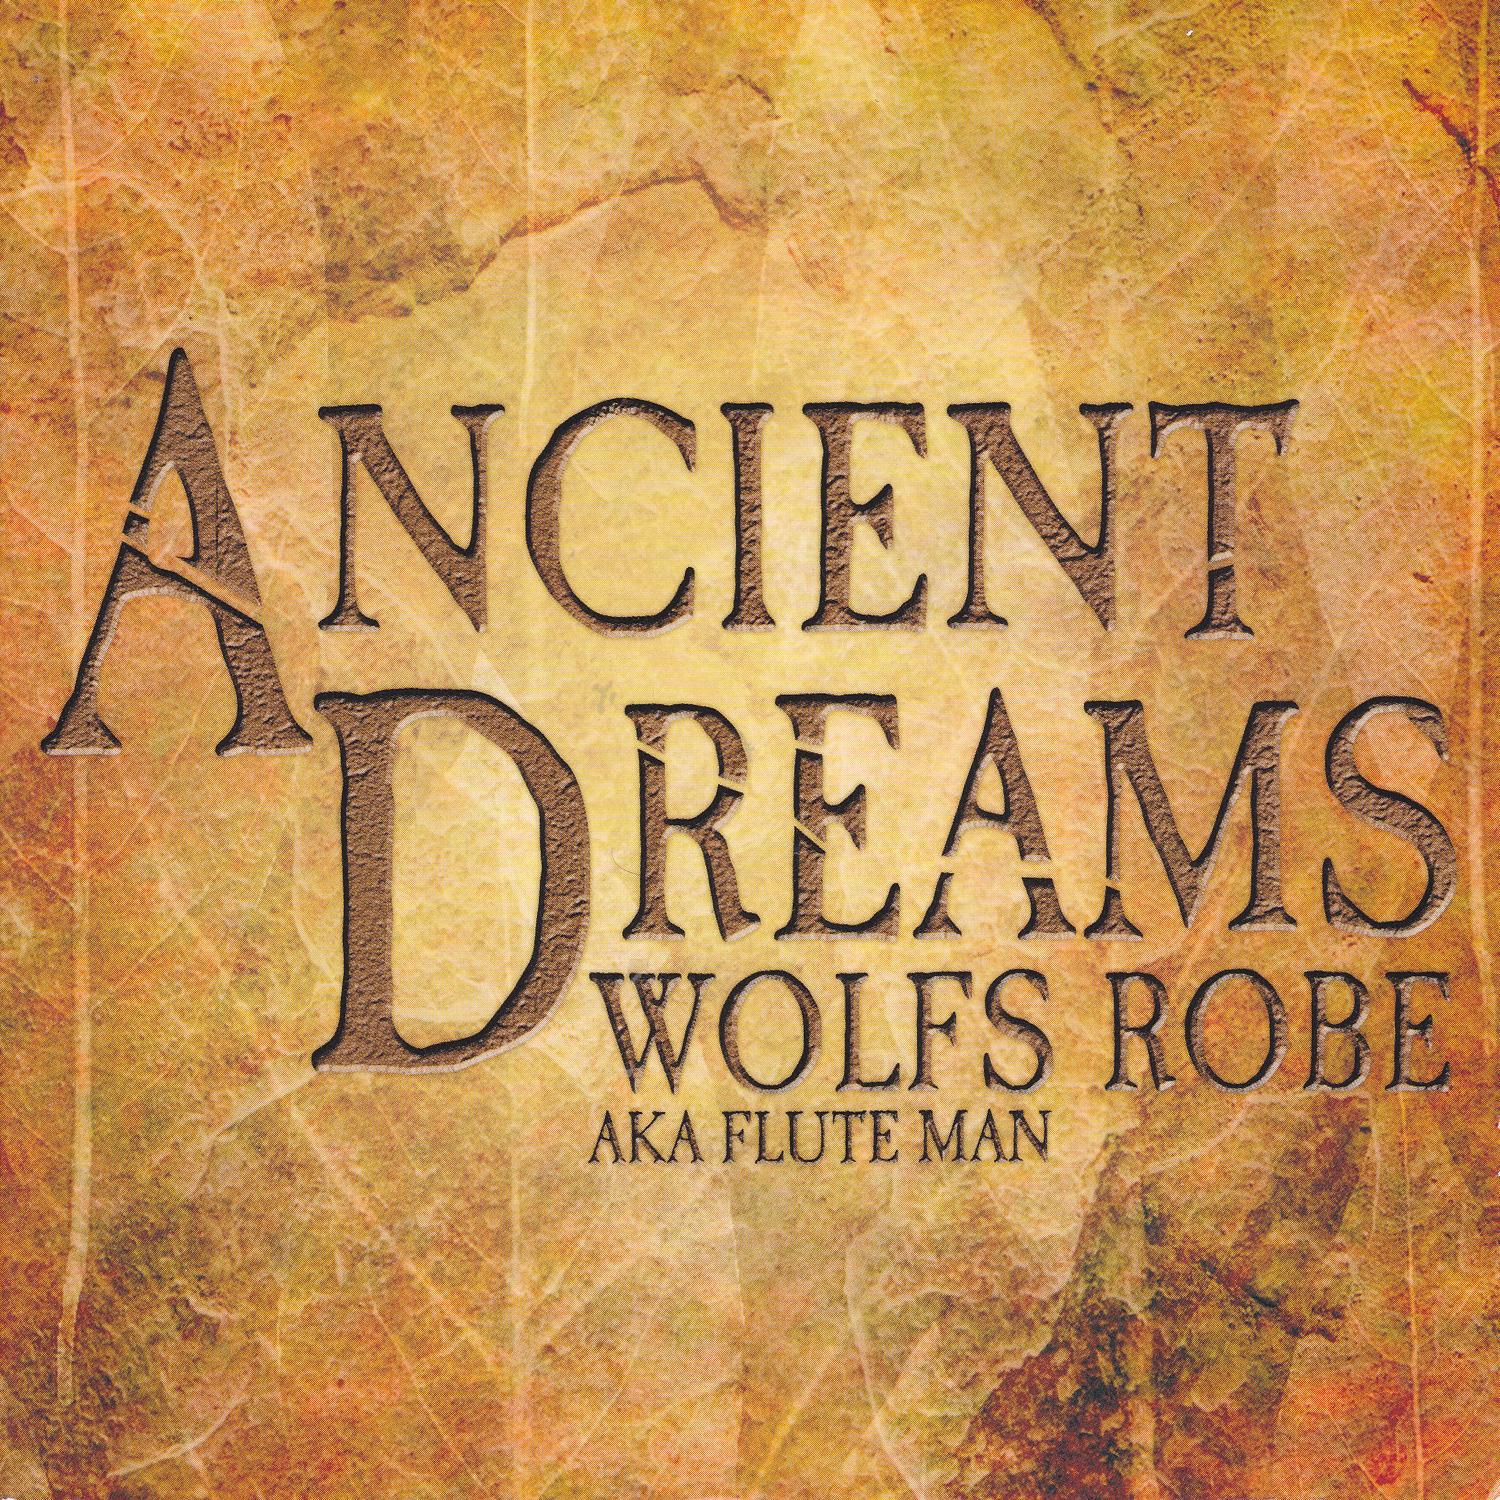 Wolfs Robe - Ancients